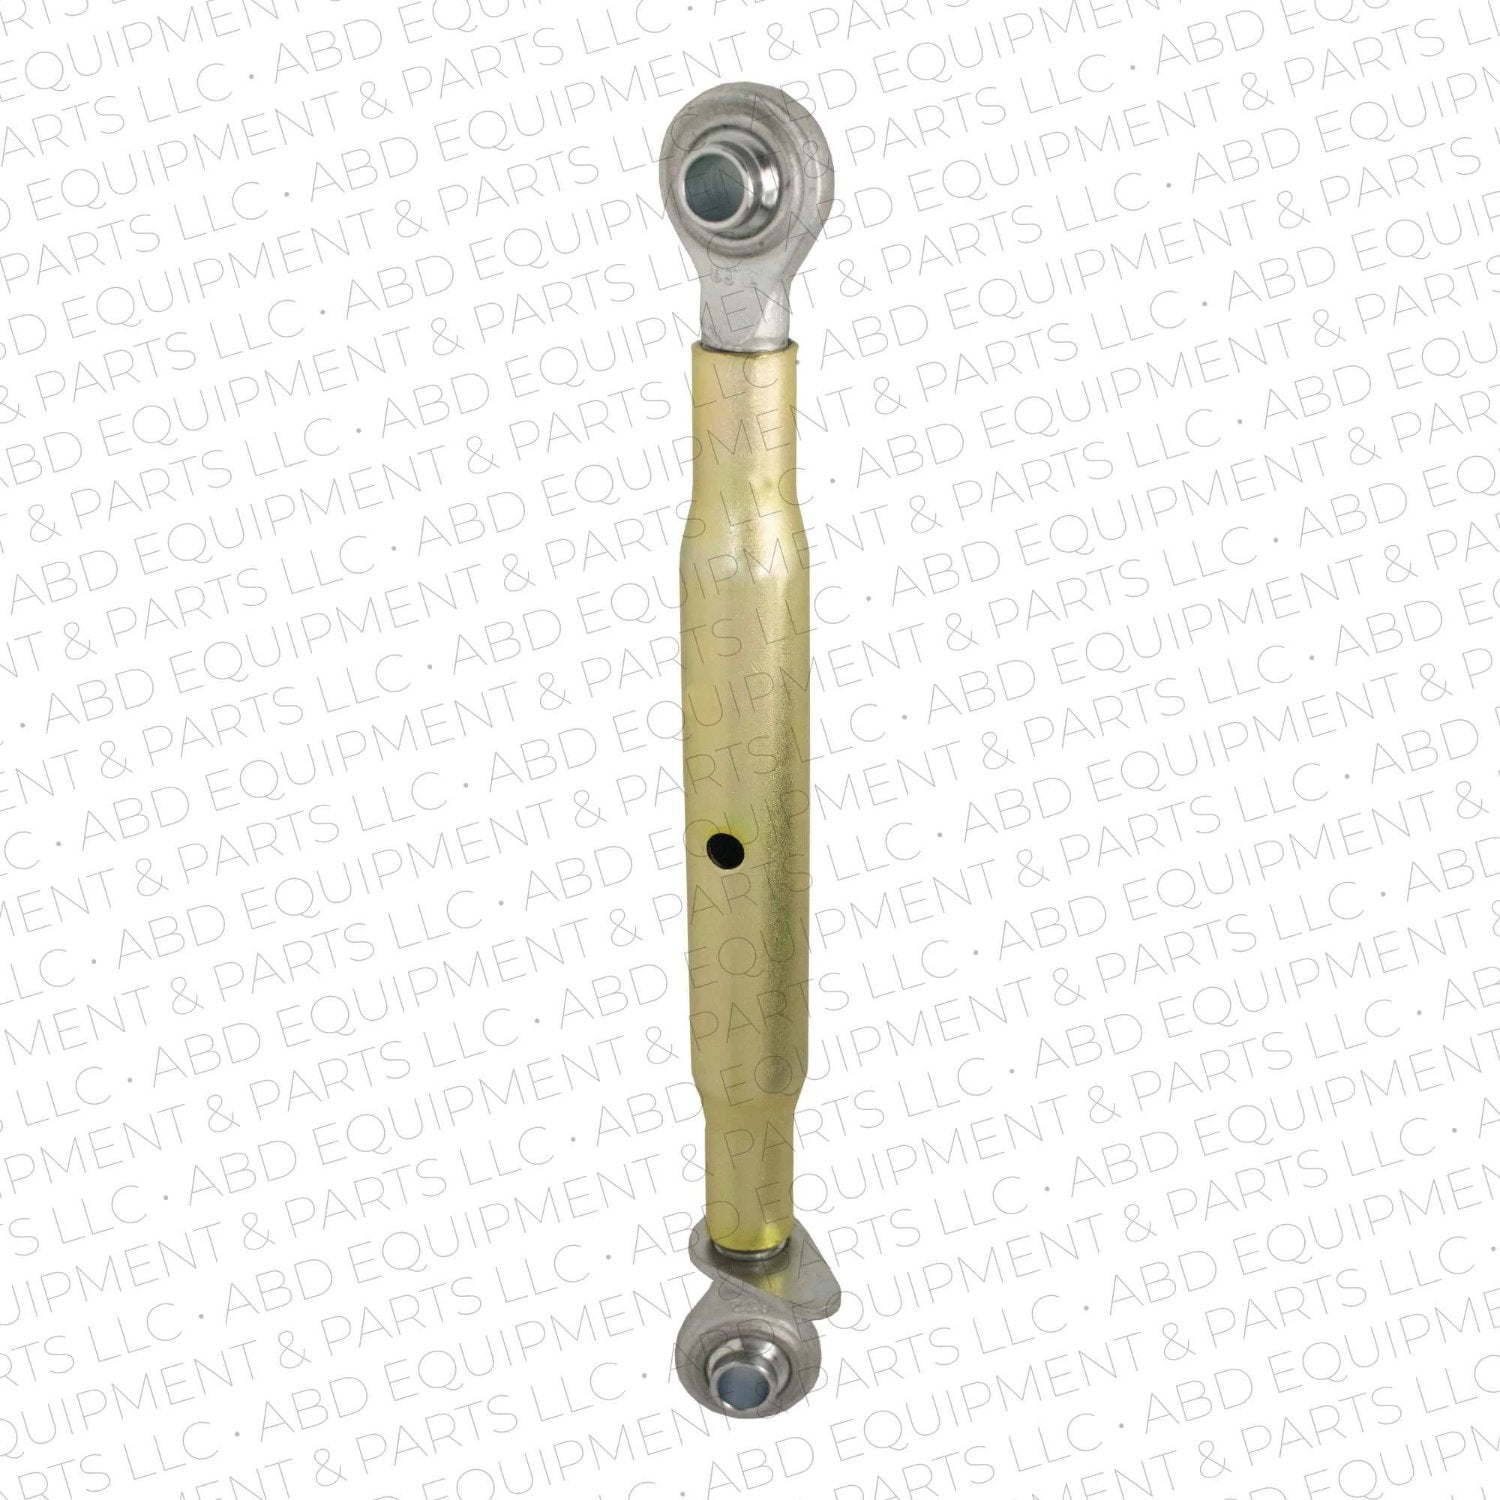 Category 2 Top link 12 inches adjust to 15 3/4 inches to 23 3/4 inch - Abd Equipment & Parts LLC